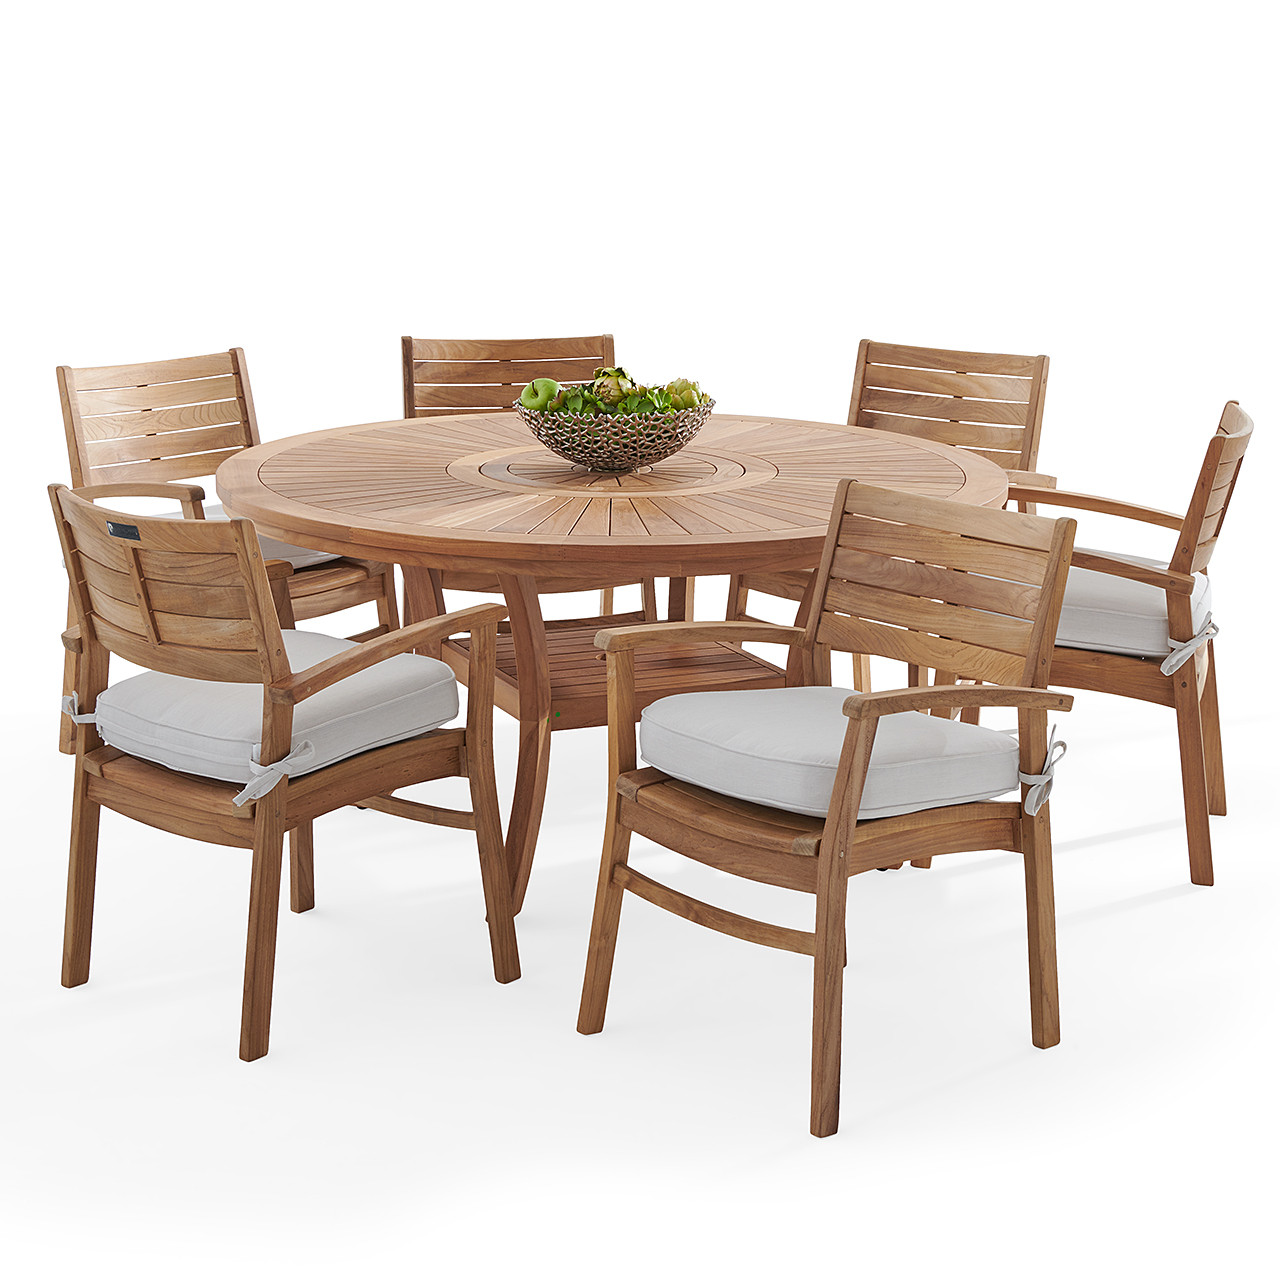 Warwick Teak with Cushions 7 Piece Dining Set + Bristol 59 in. D Table